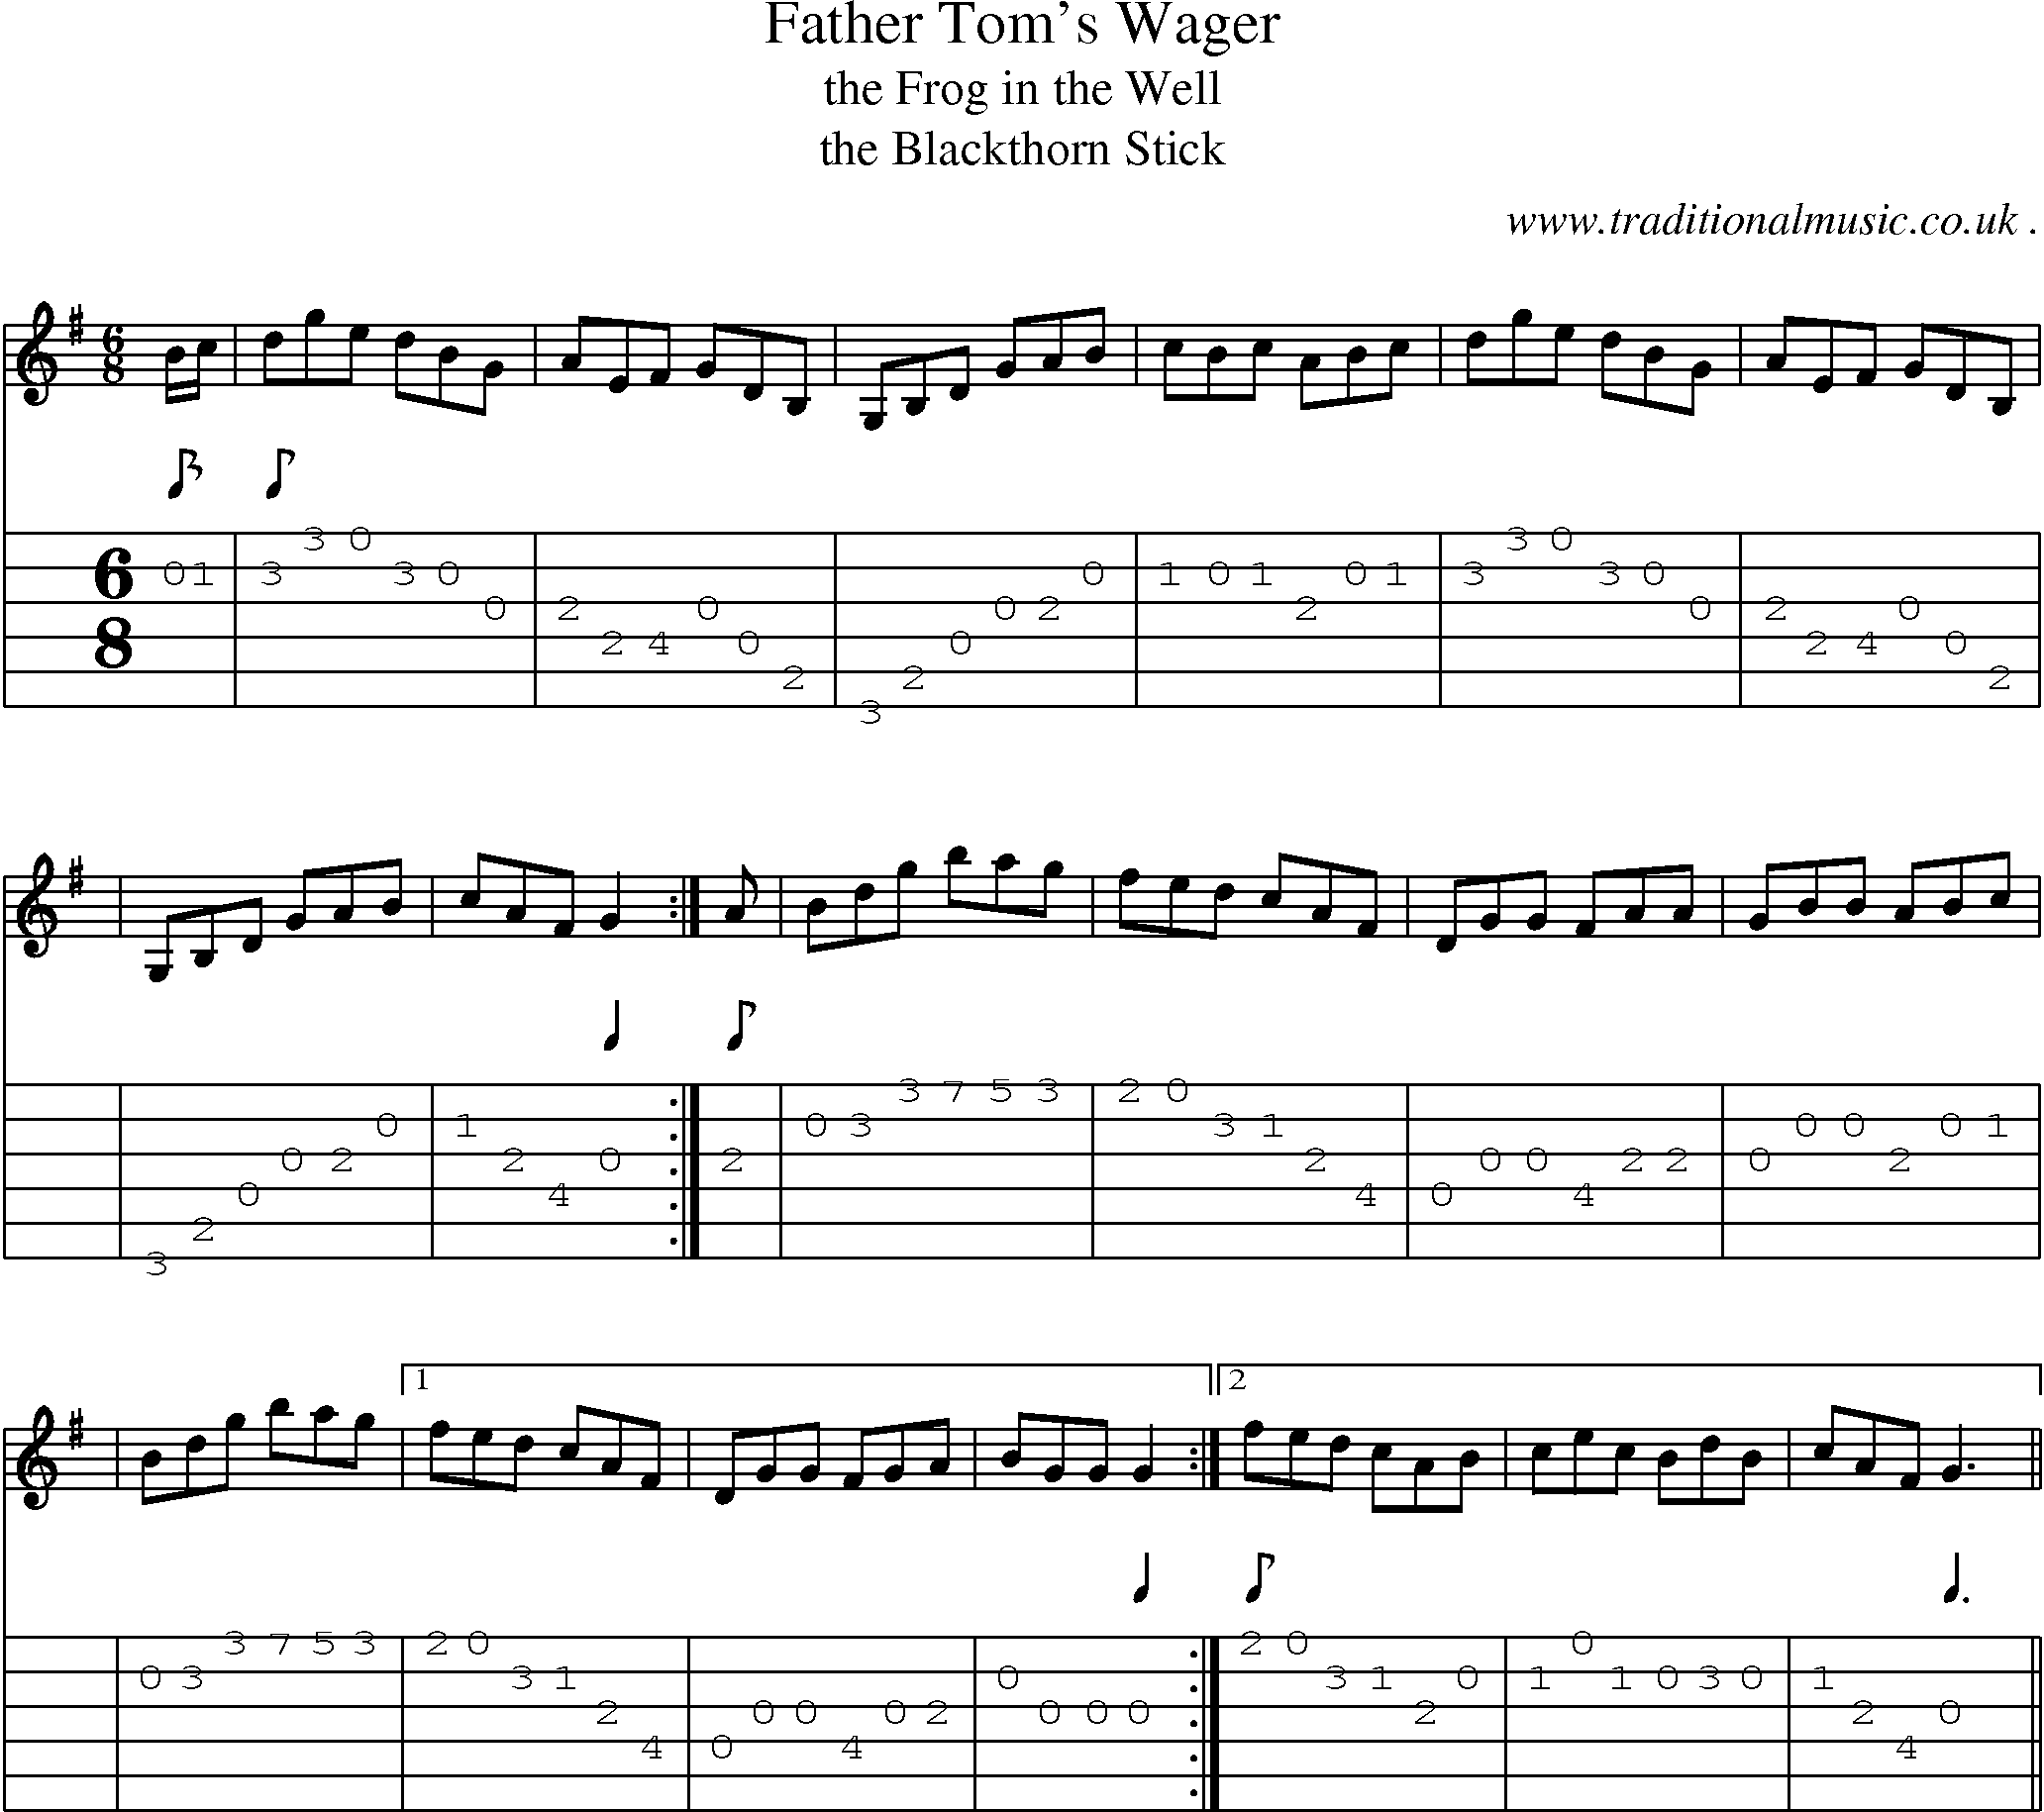 Sheet-music  score, Chords and Guitar Tabs for Father Toms Wager